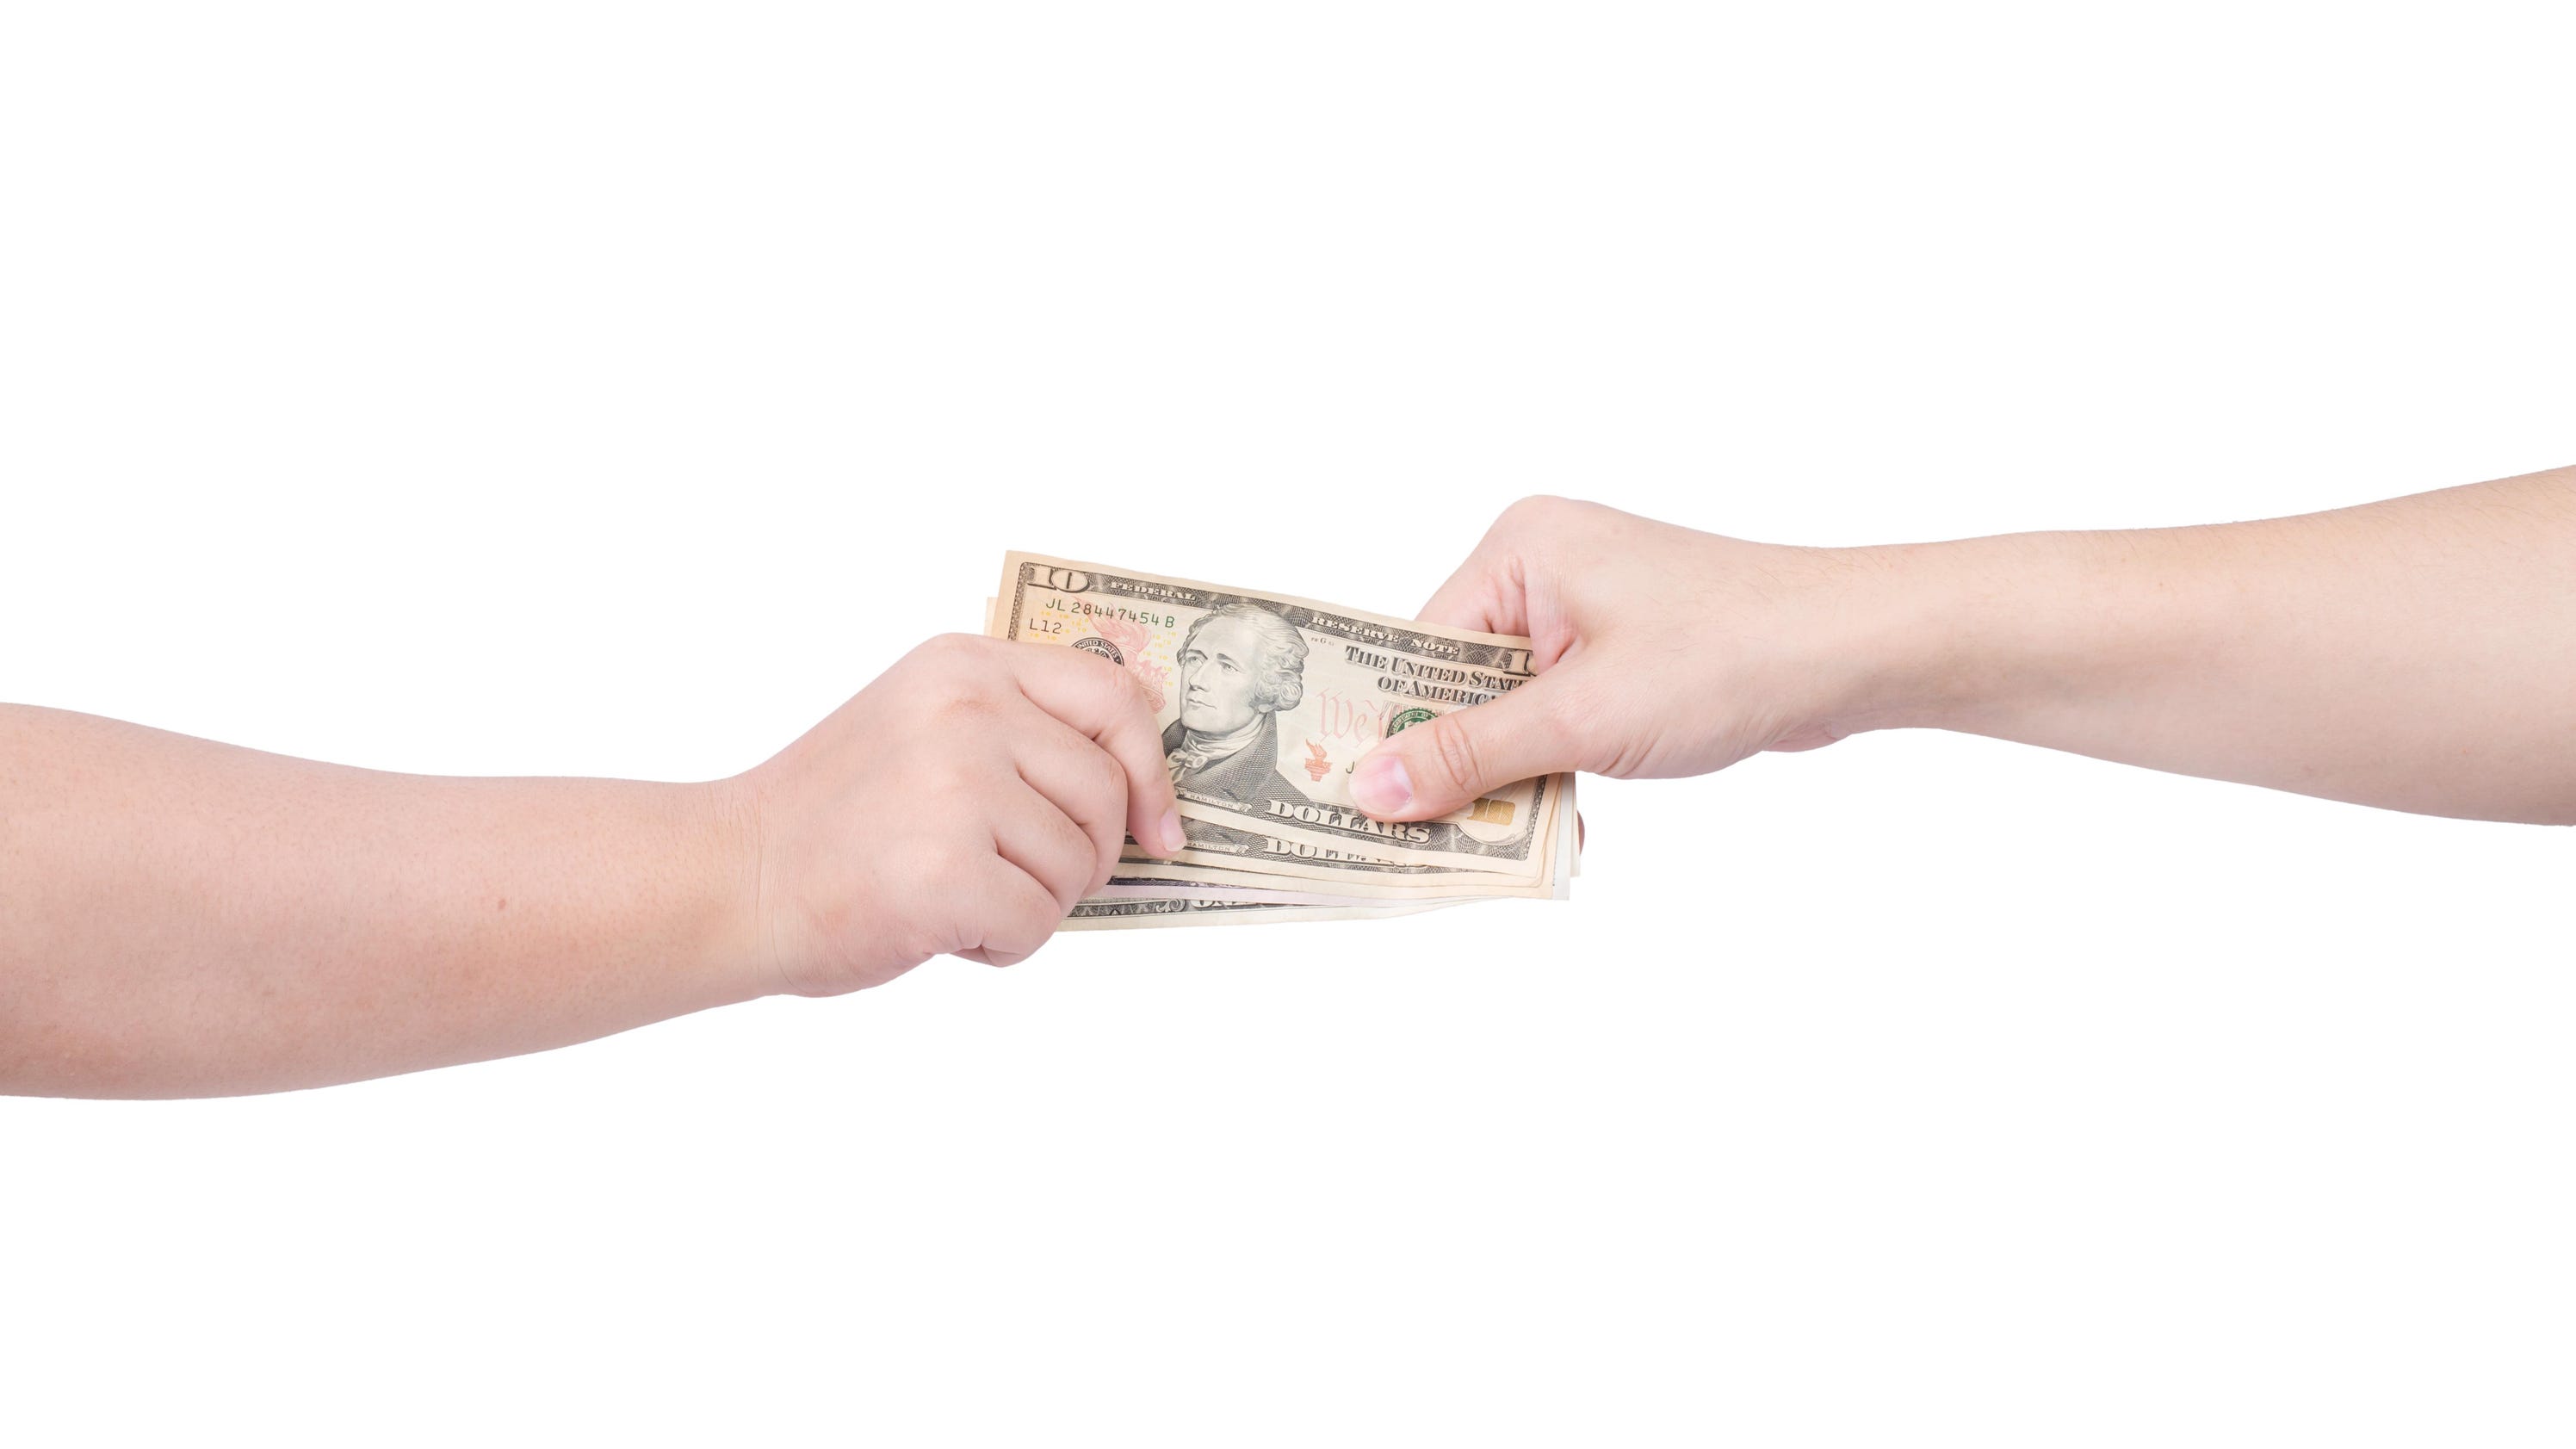 Should you borrow money from family and friends?